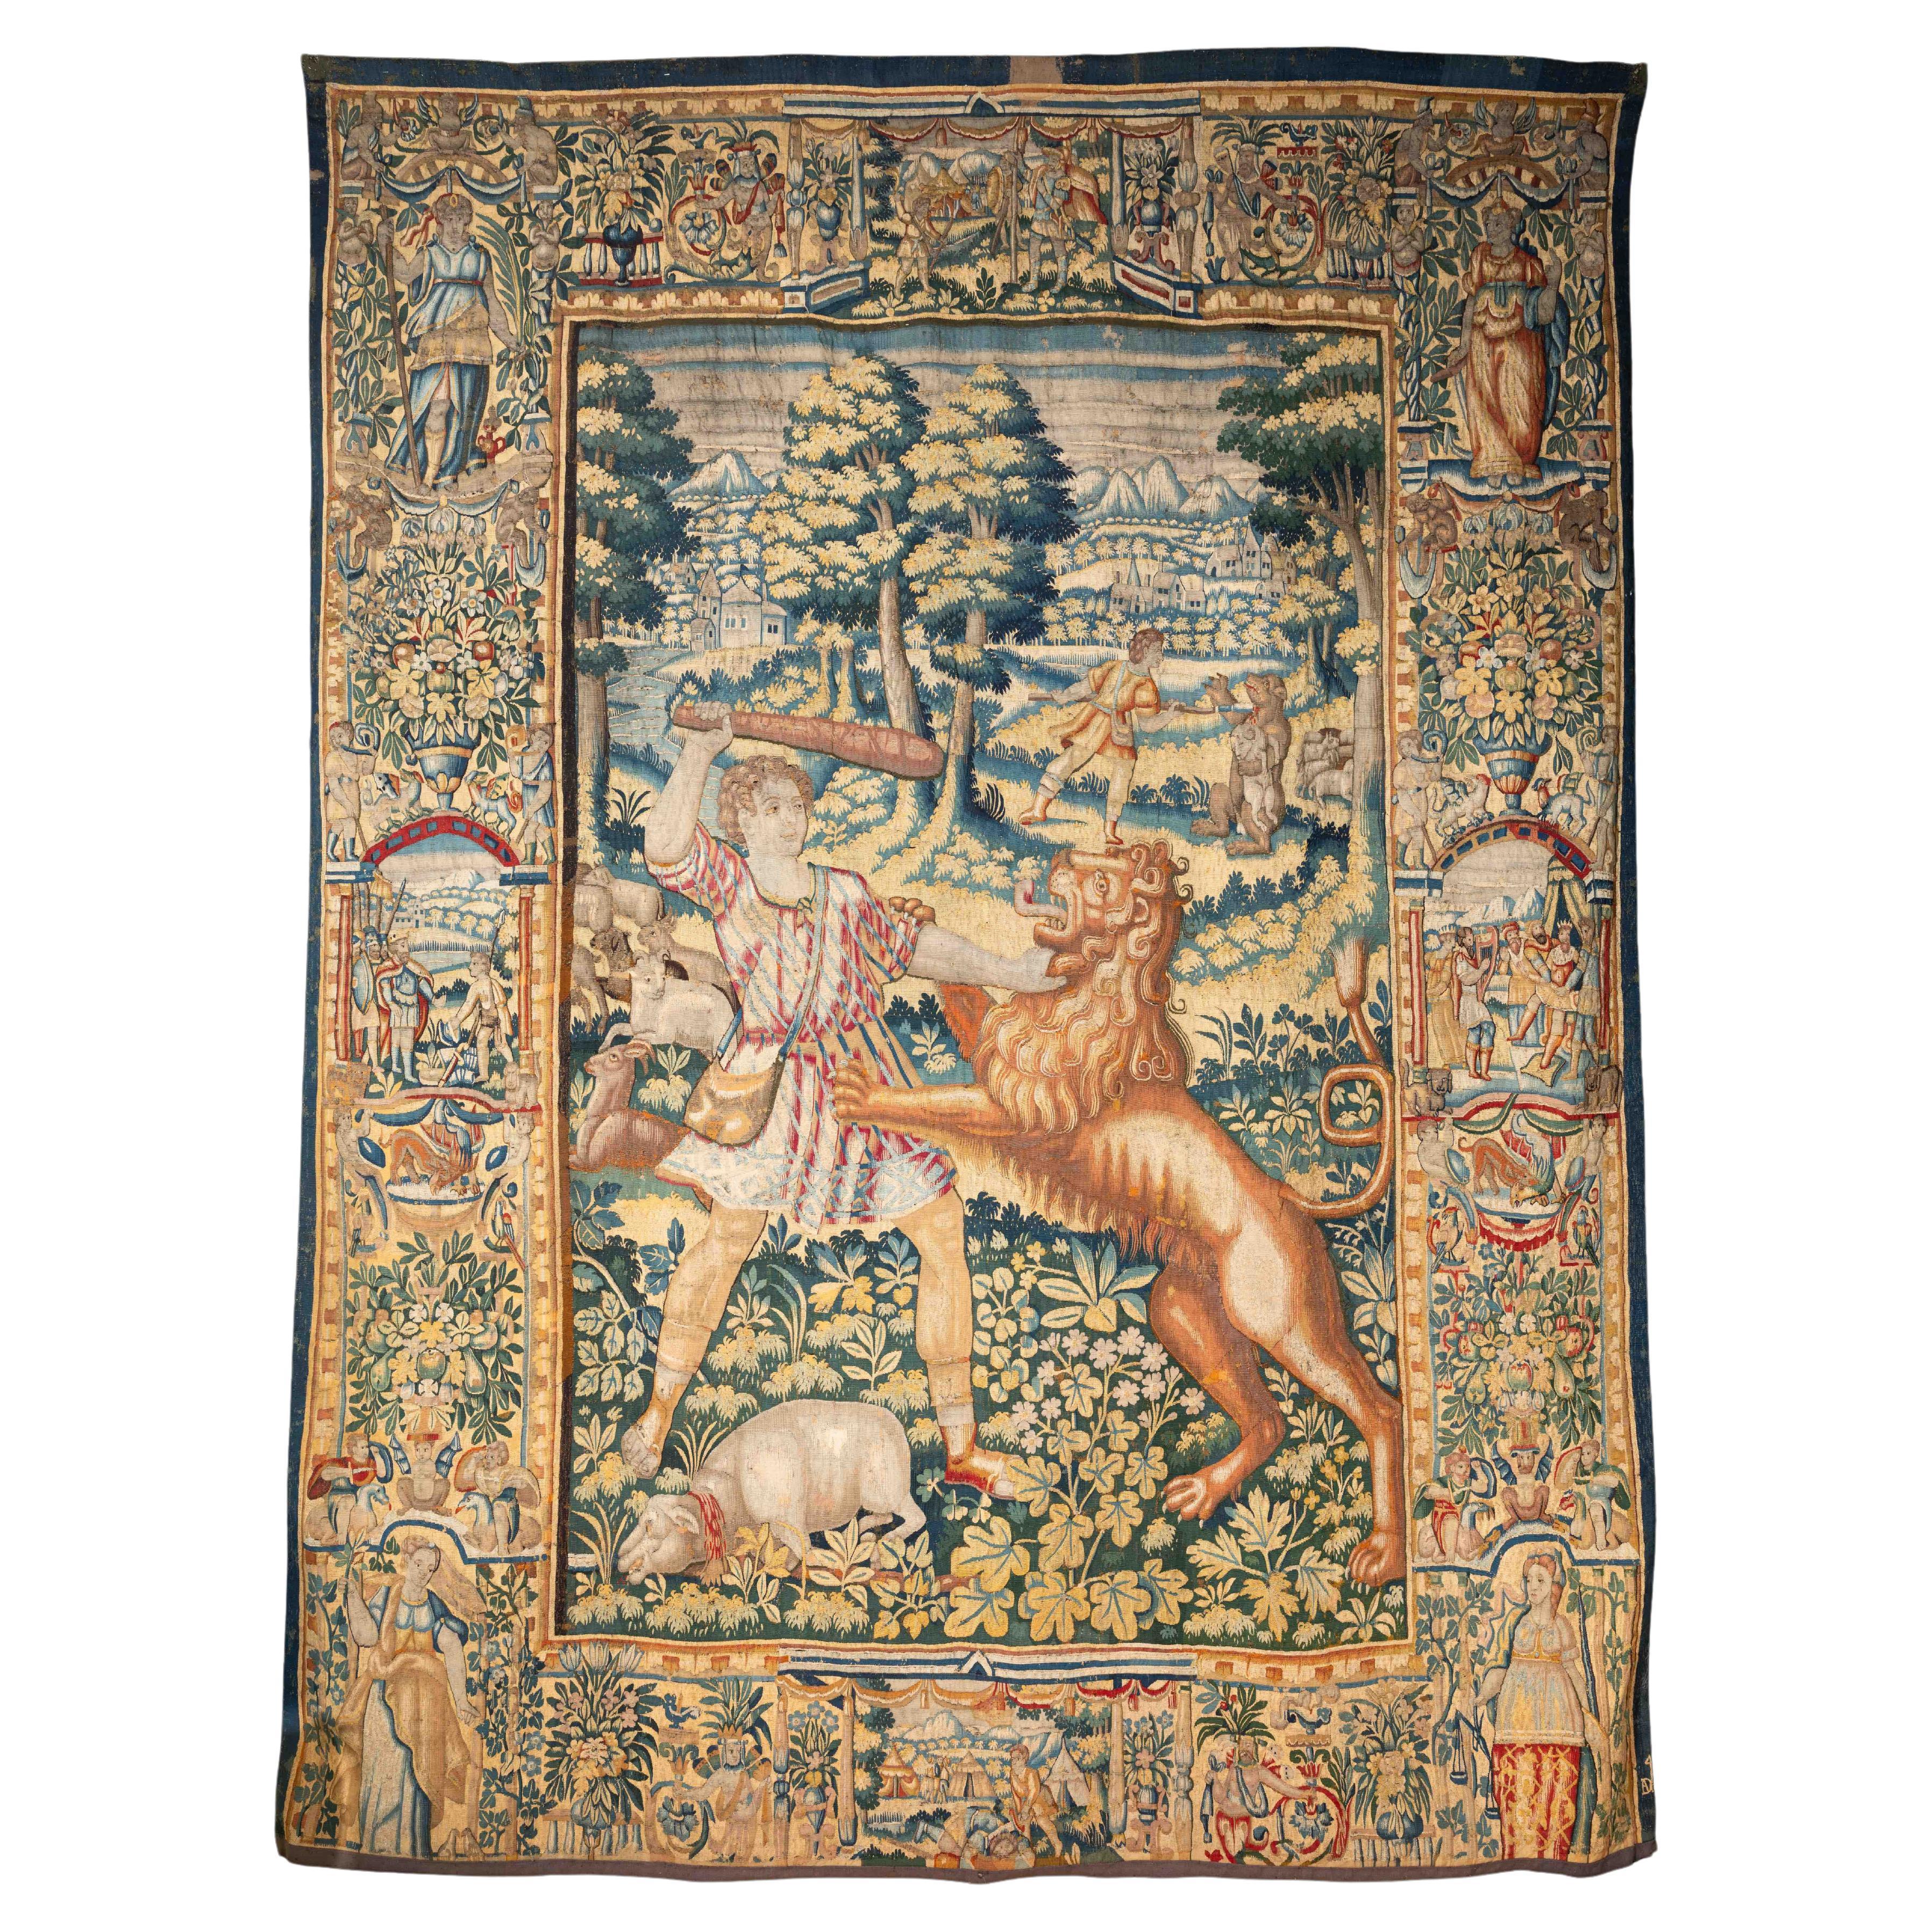 16th century Brussels tapestry - The Story of David